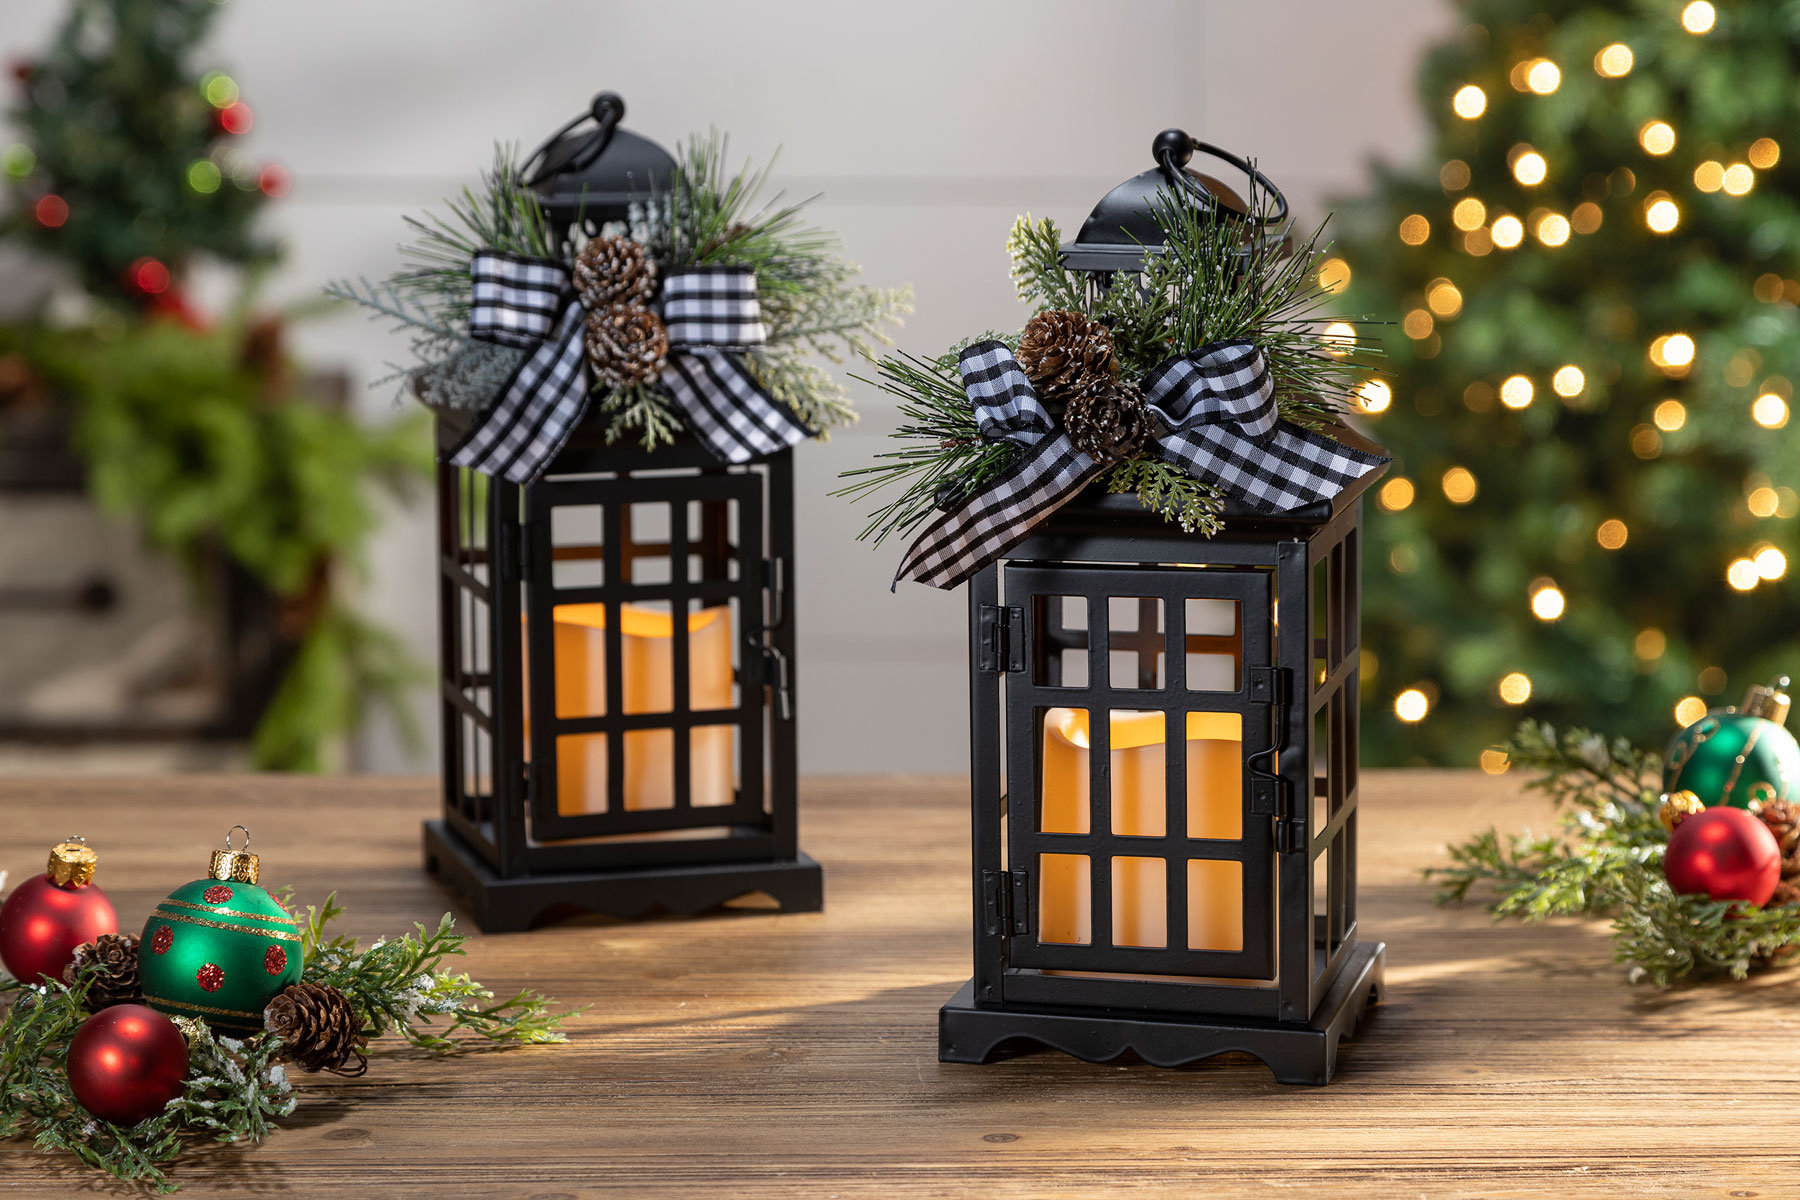 20.5” Battery Operated Lighted Holiday Lantern with Led Candle and Floral  Accent - Decorator's Warehouse